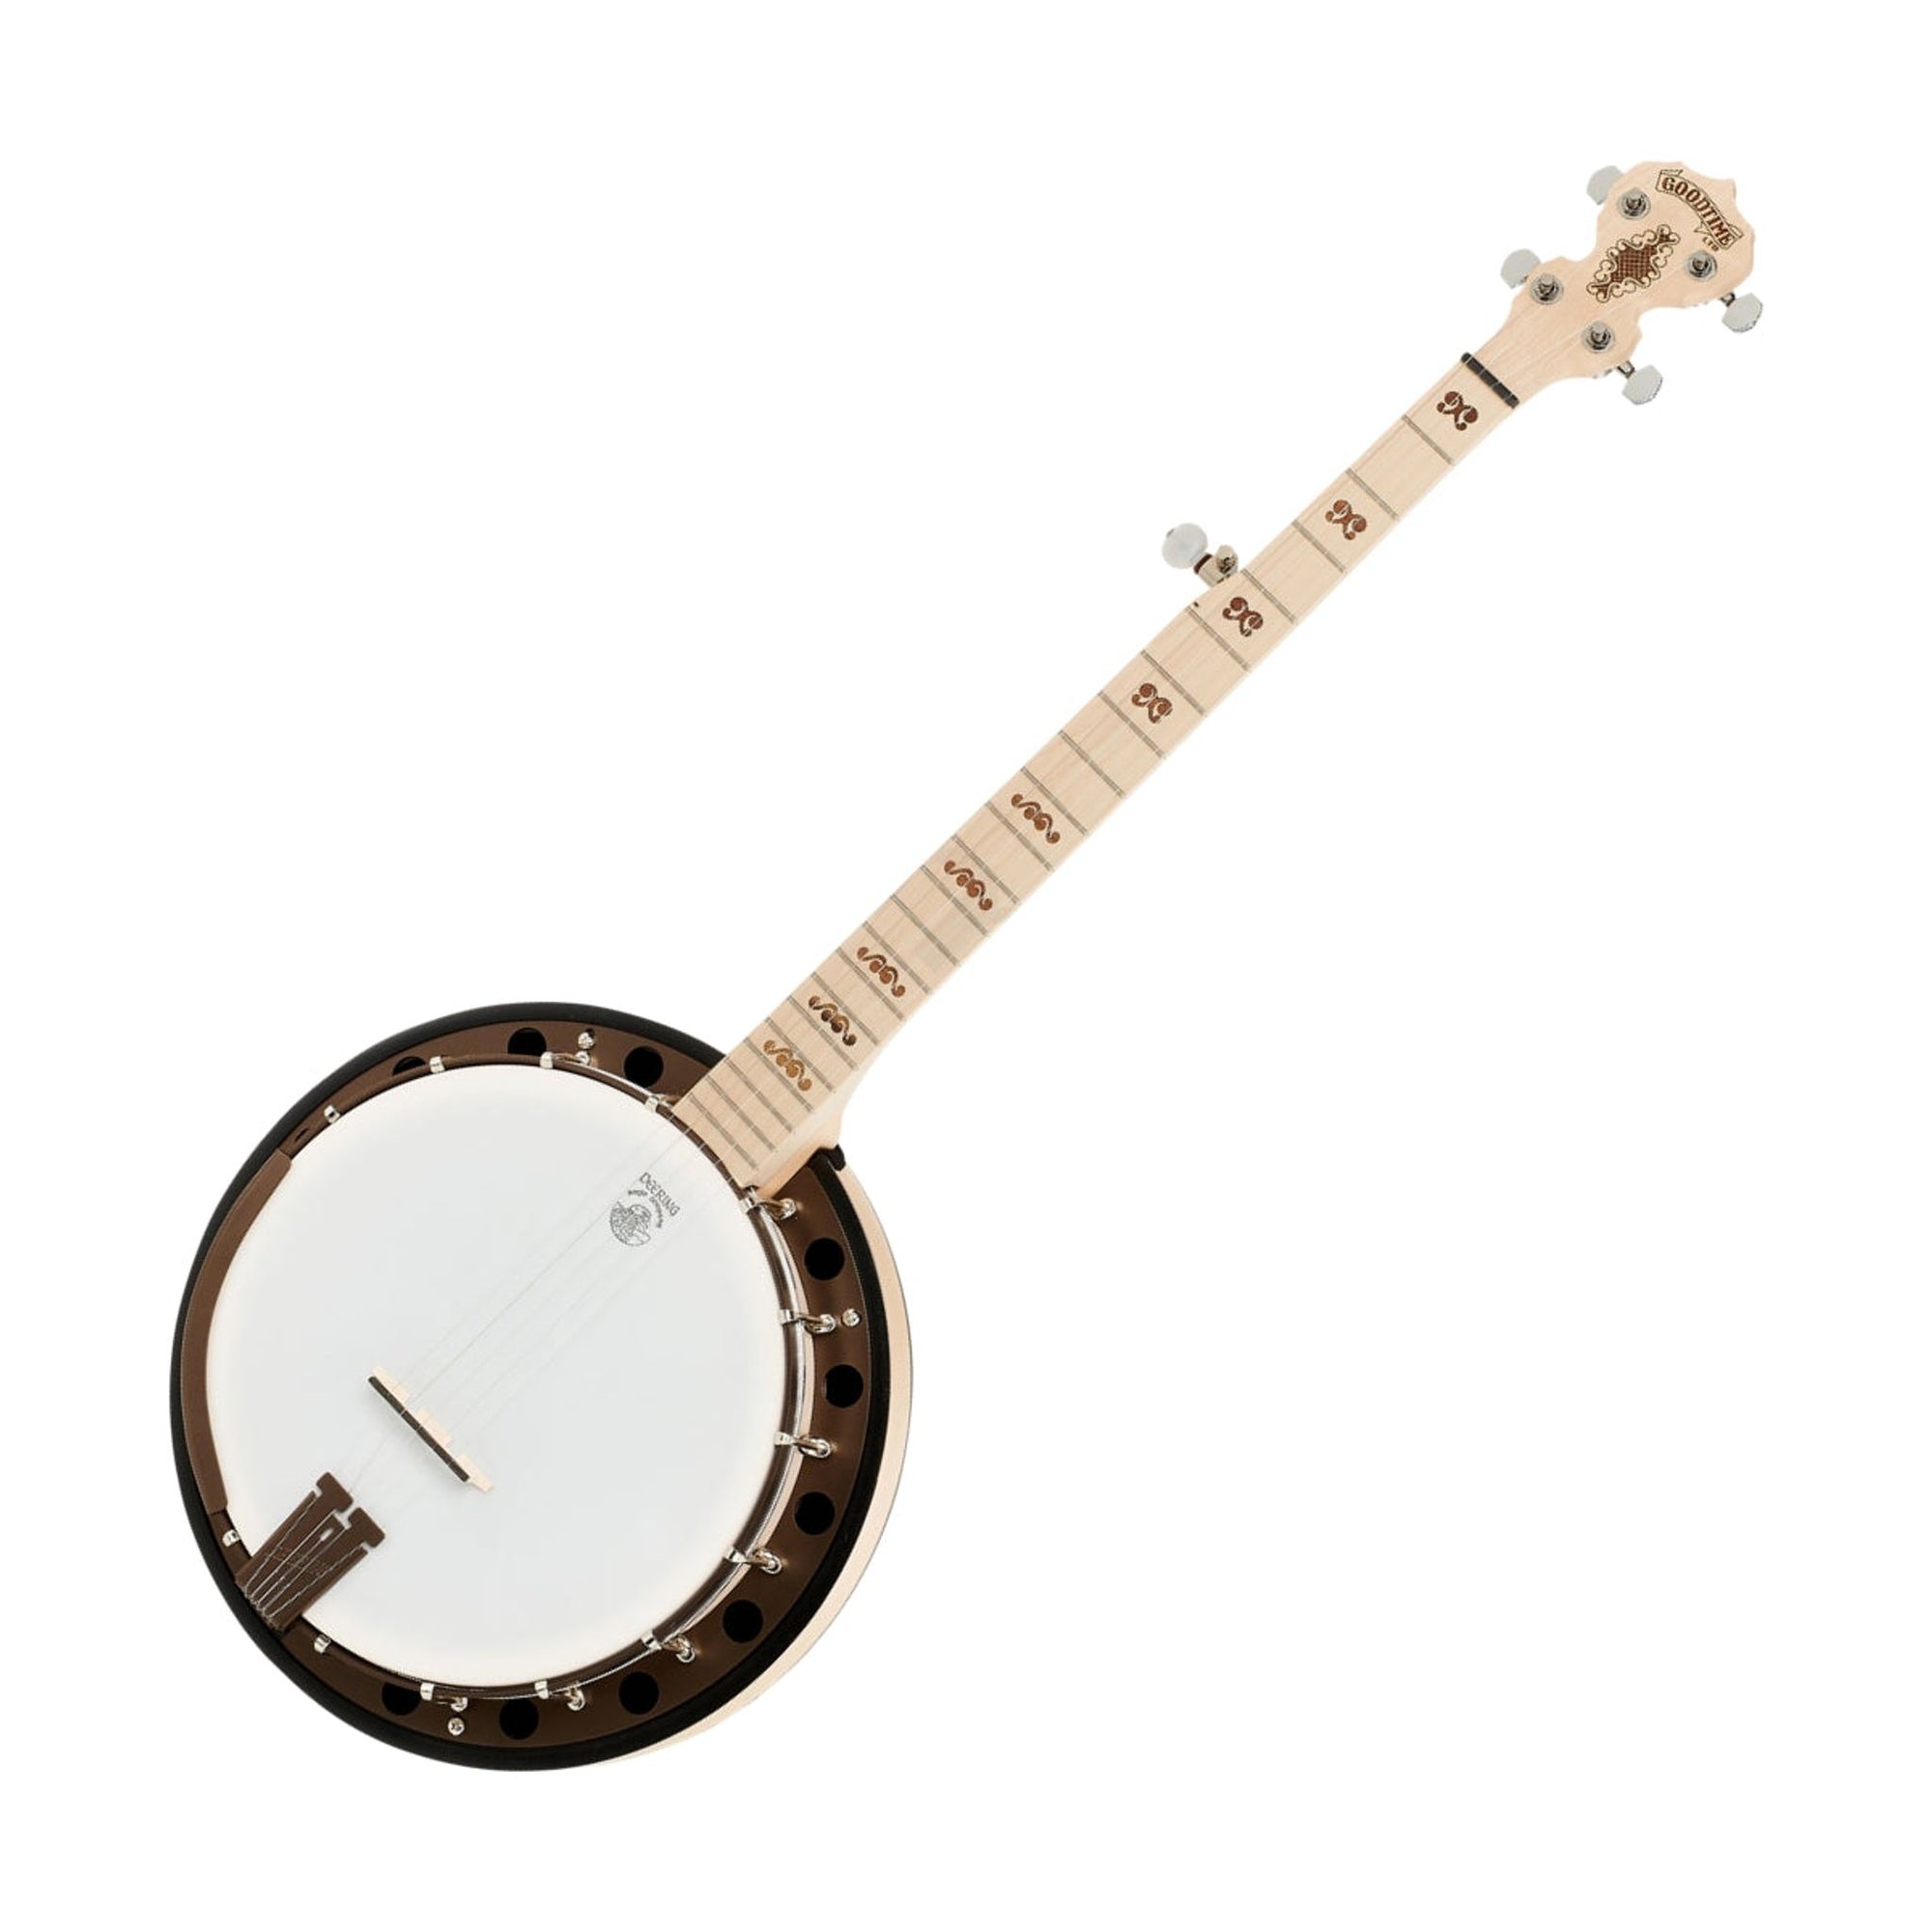 The Deering Goodtime Two Limited Edition Bronze banjo is a limited release of the extremely popular Goodtime Two model. An elegant Gold Rubbed Bronze finish offers an extremely durable, low maintenance and completely hypoallergenic hardware option.